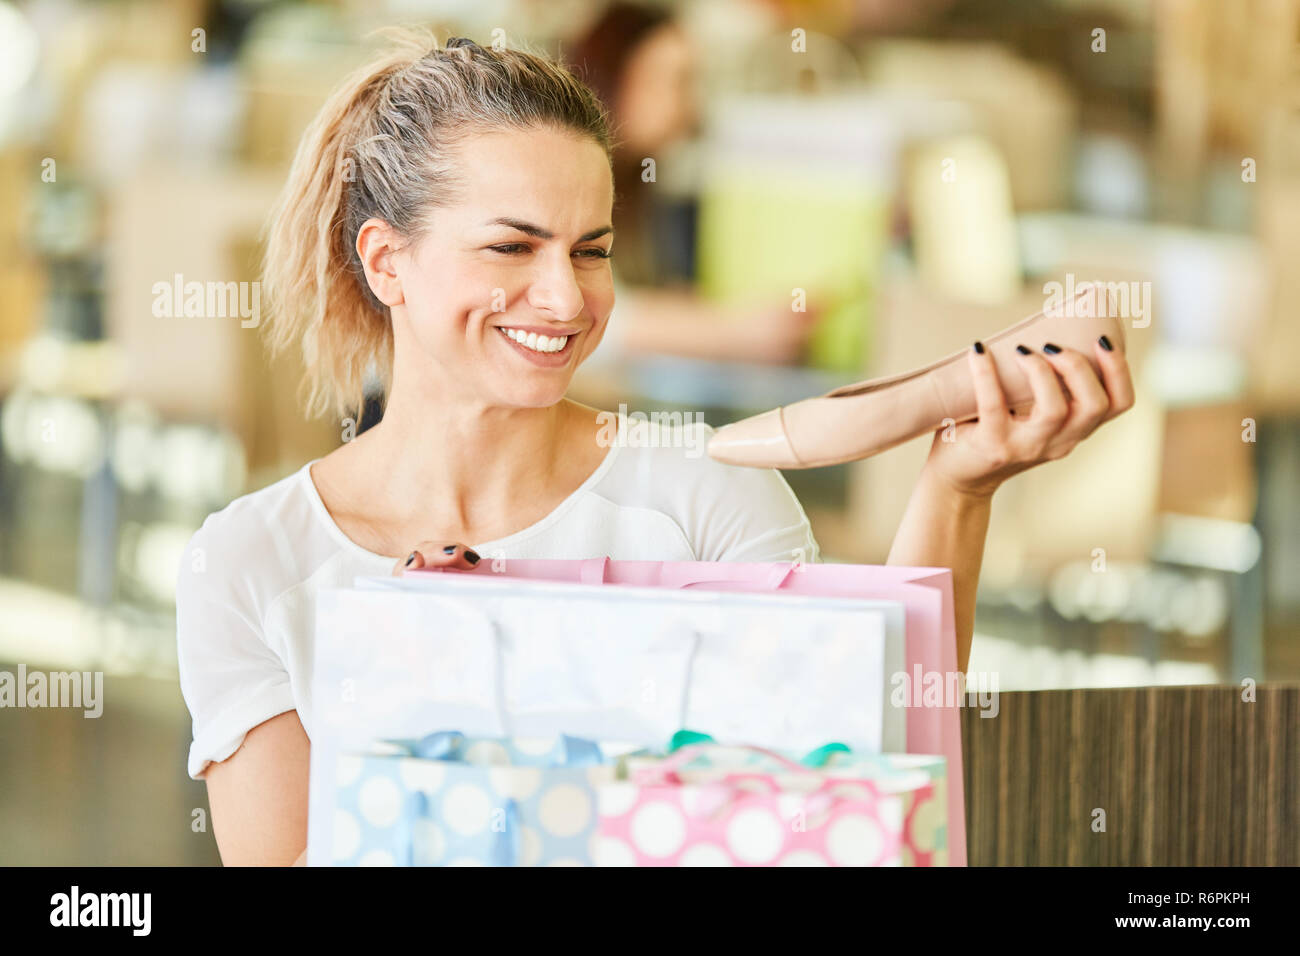 Young woman as a consumer is happy about new shoes while shopping Stock Photo